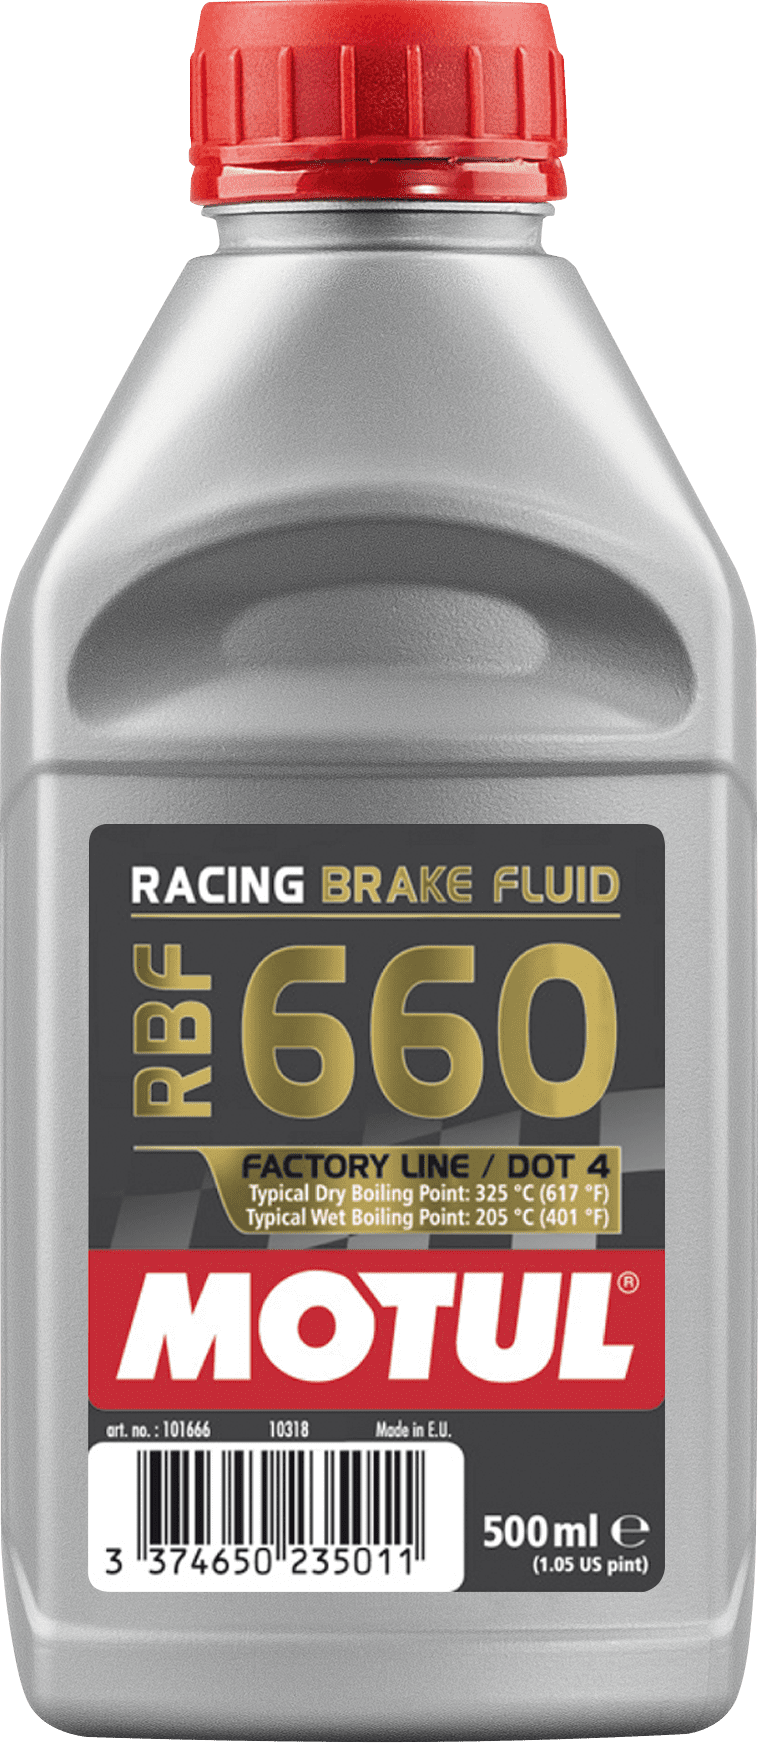 101666-500ML High Performance brake bluid with very high dry boiling point of 617°F (325°C) and wet boiling point of 400°F (204°C).